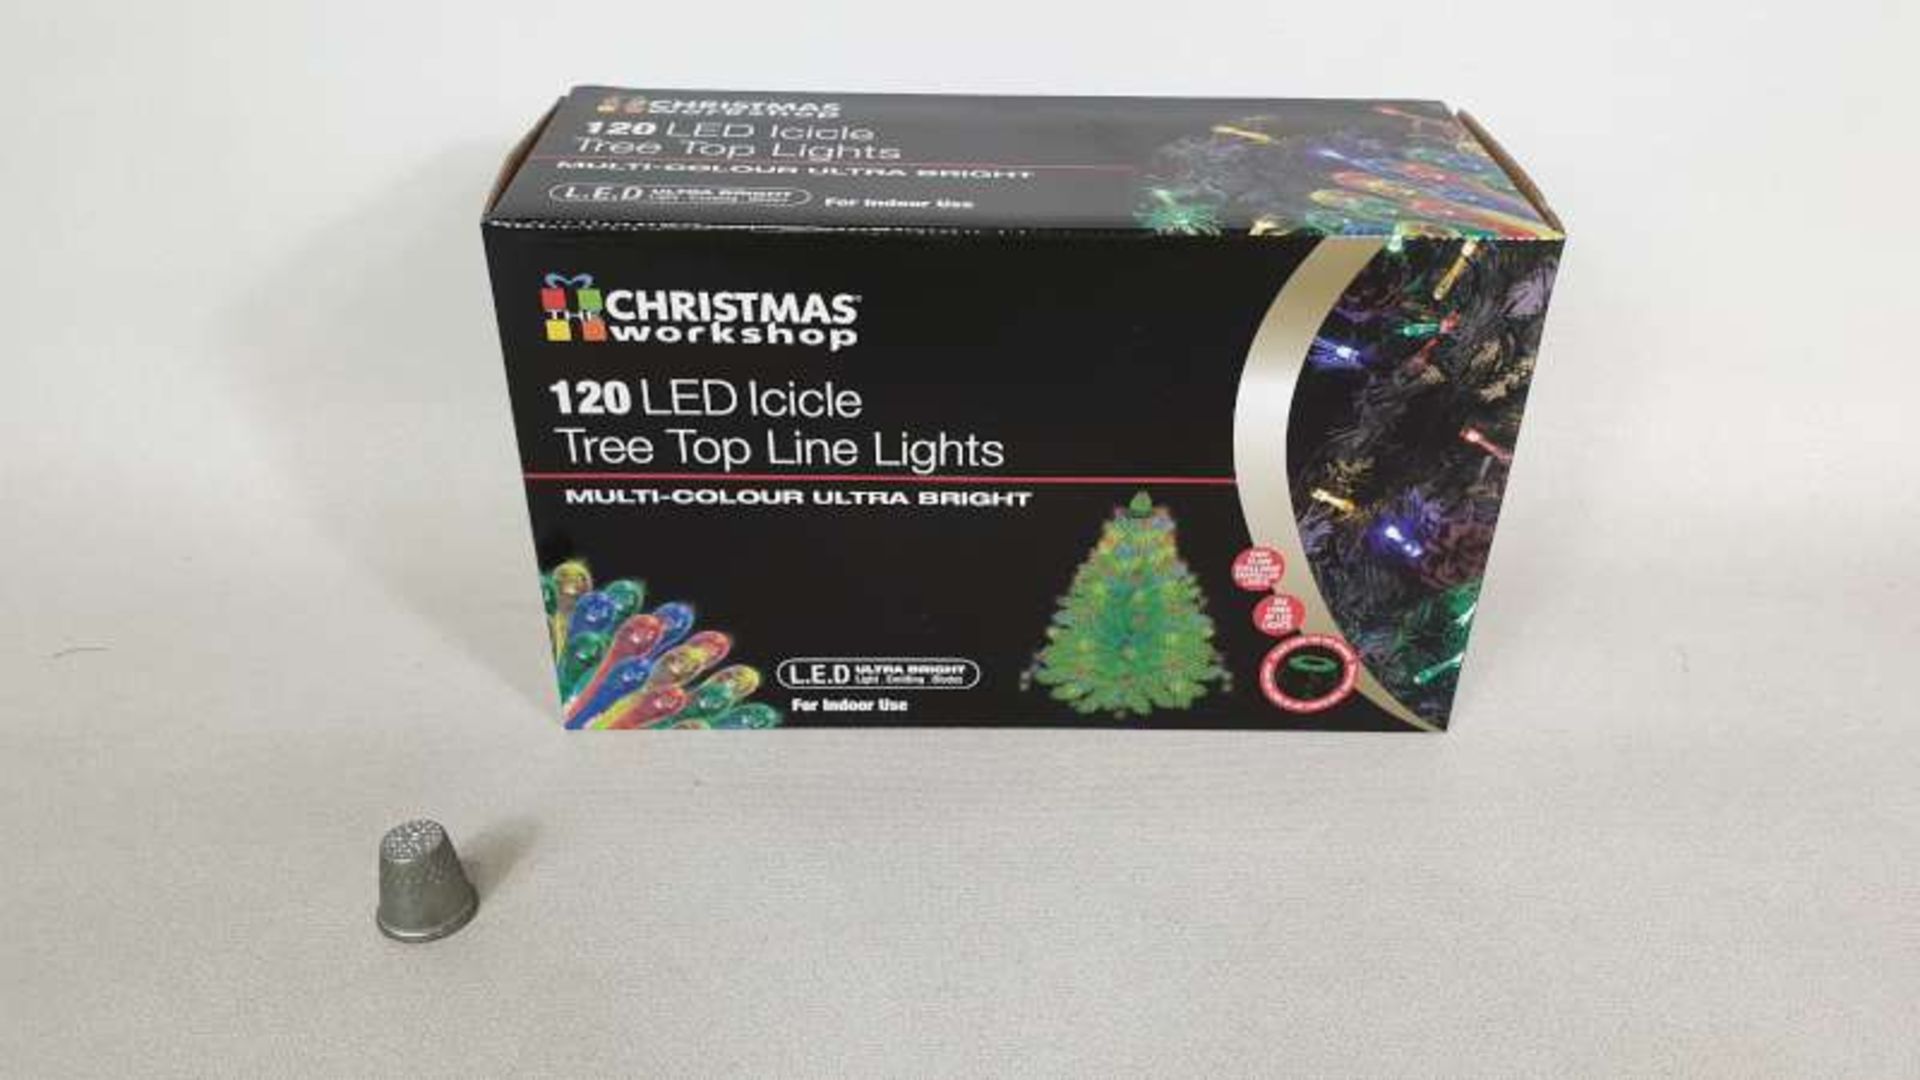 24 X 120 X LED ICICLE MULTI COLOURED TREE TOP LINE LIGHTS IN 2 BOXES